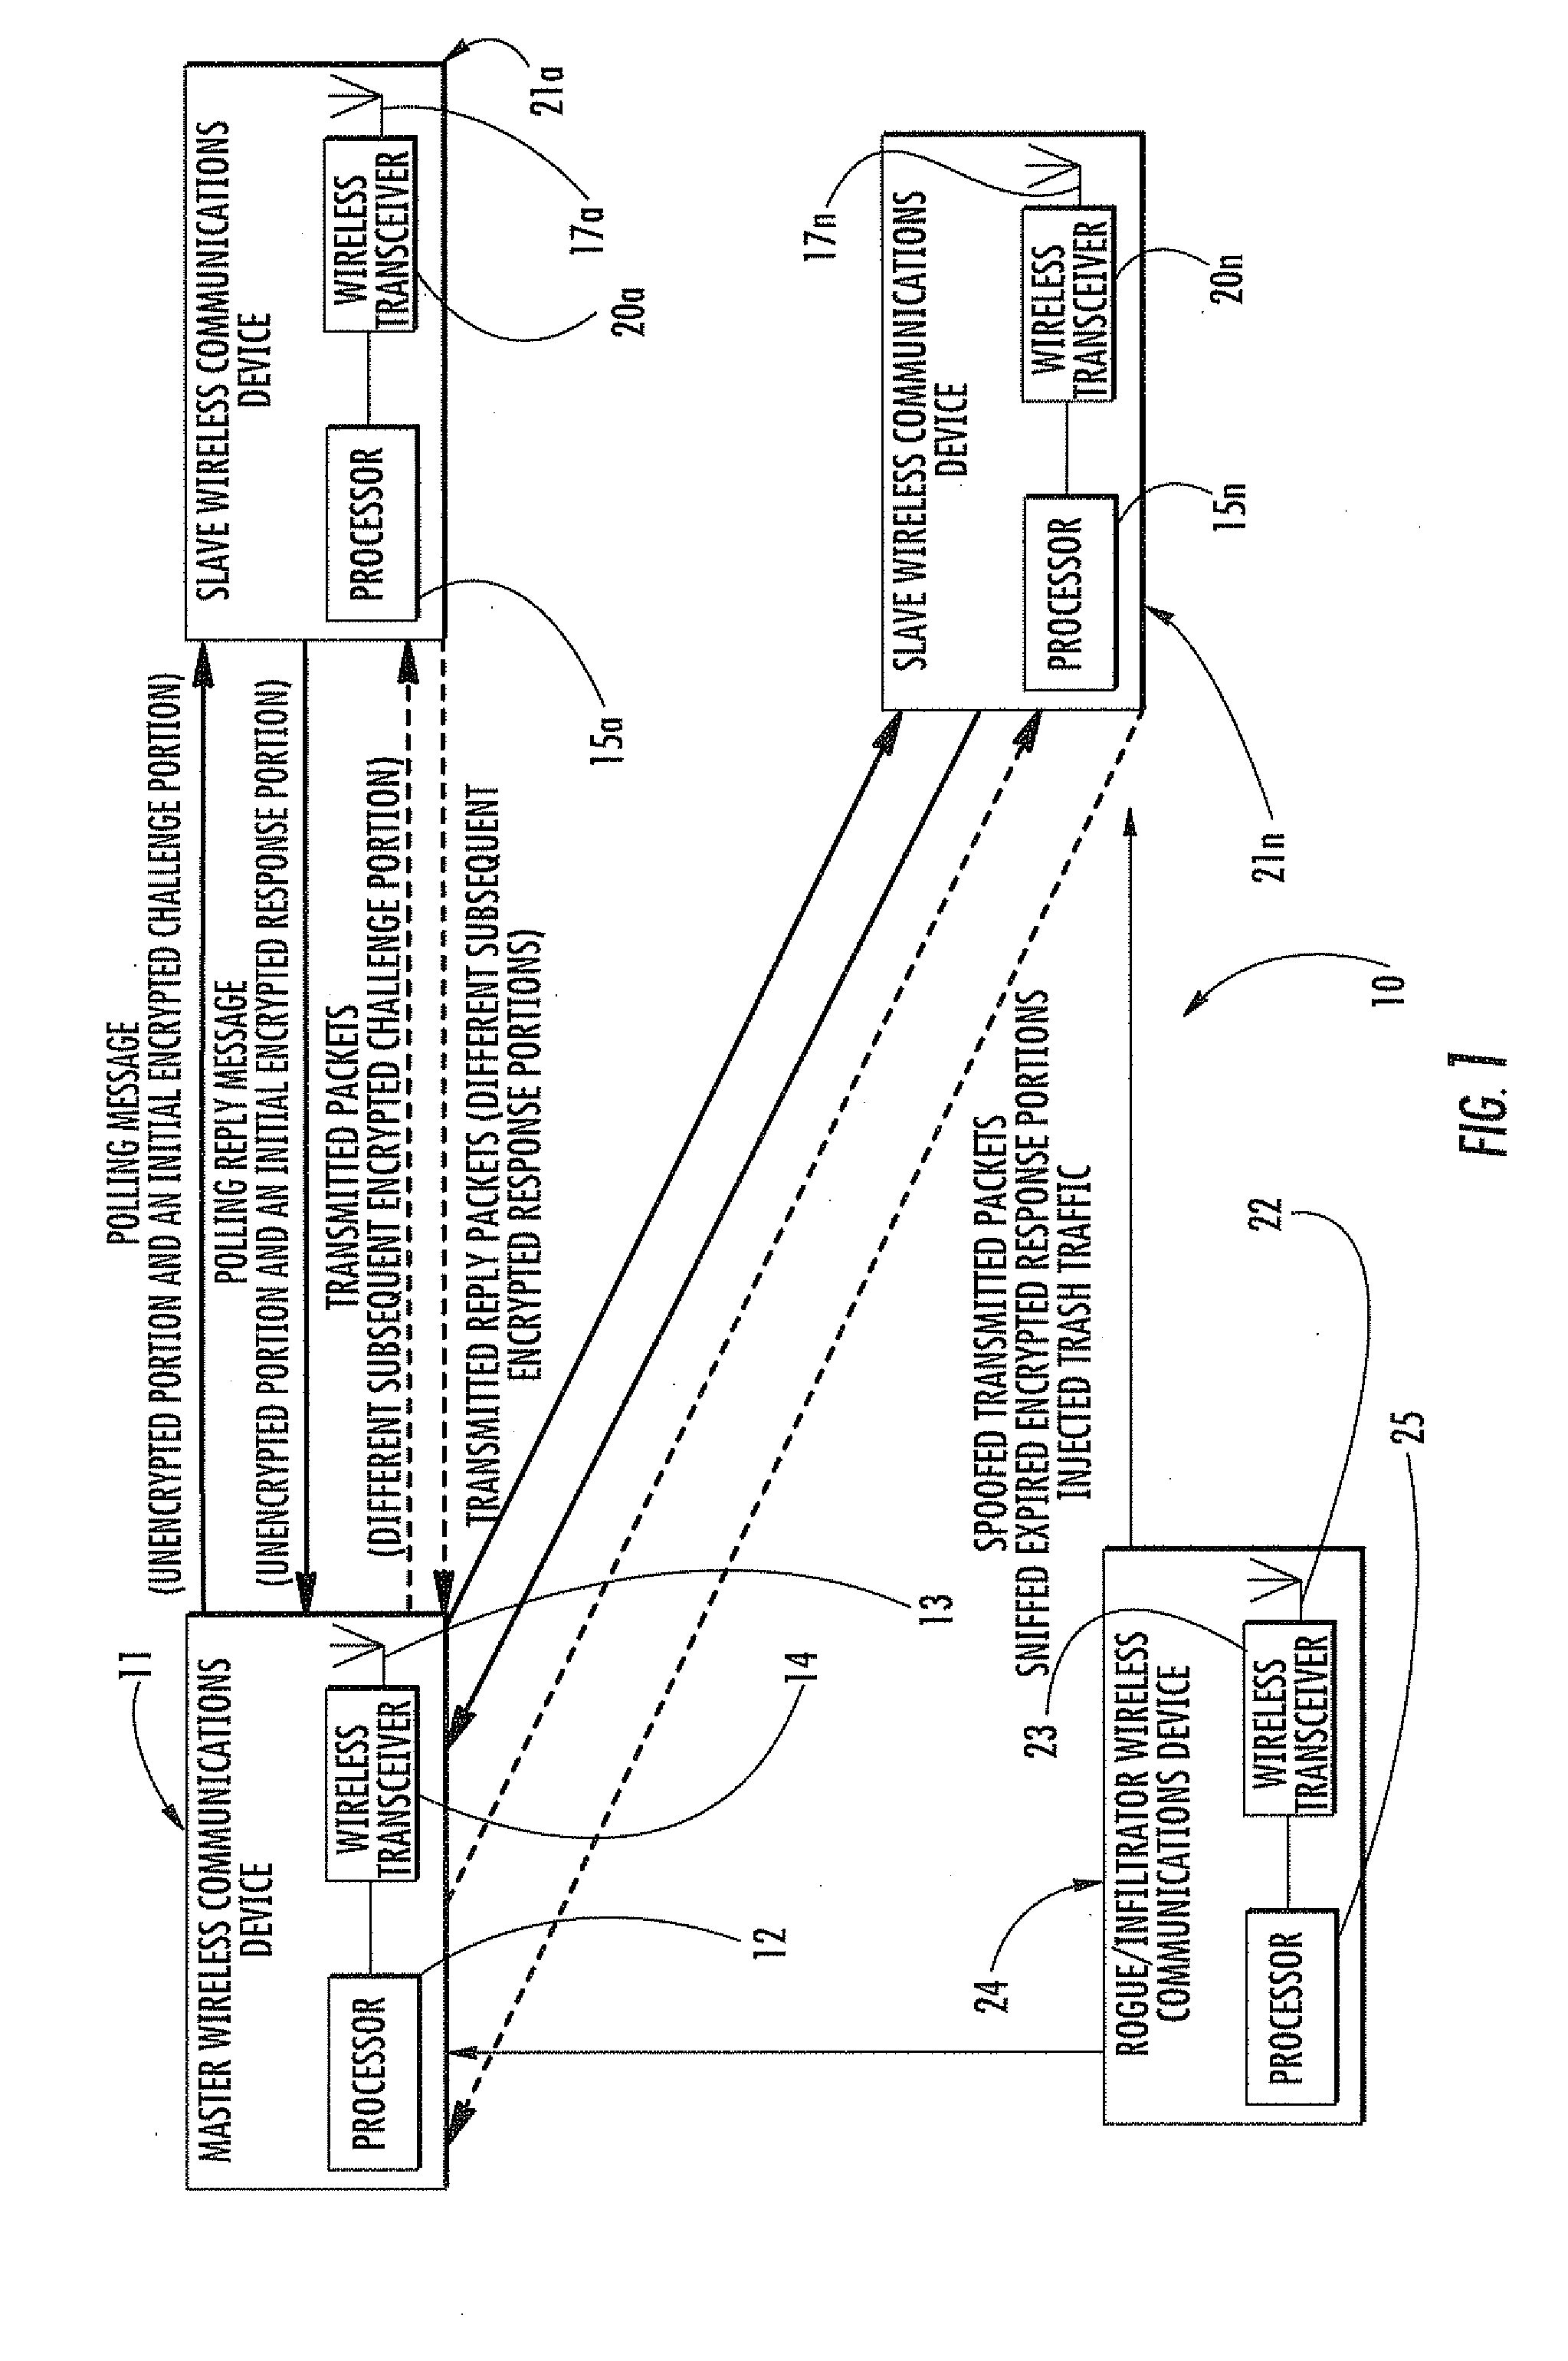 Secure wireless communications system and related method